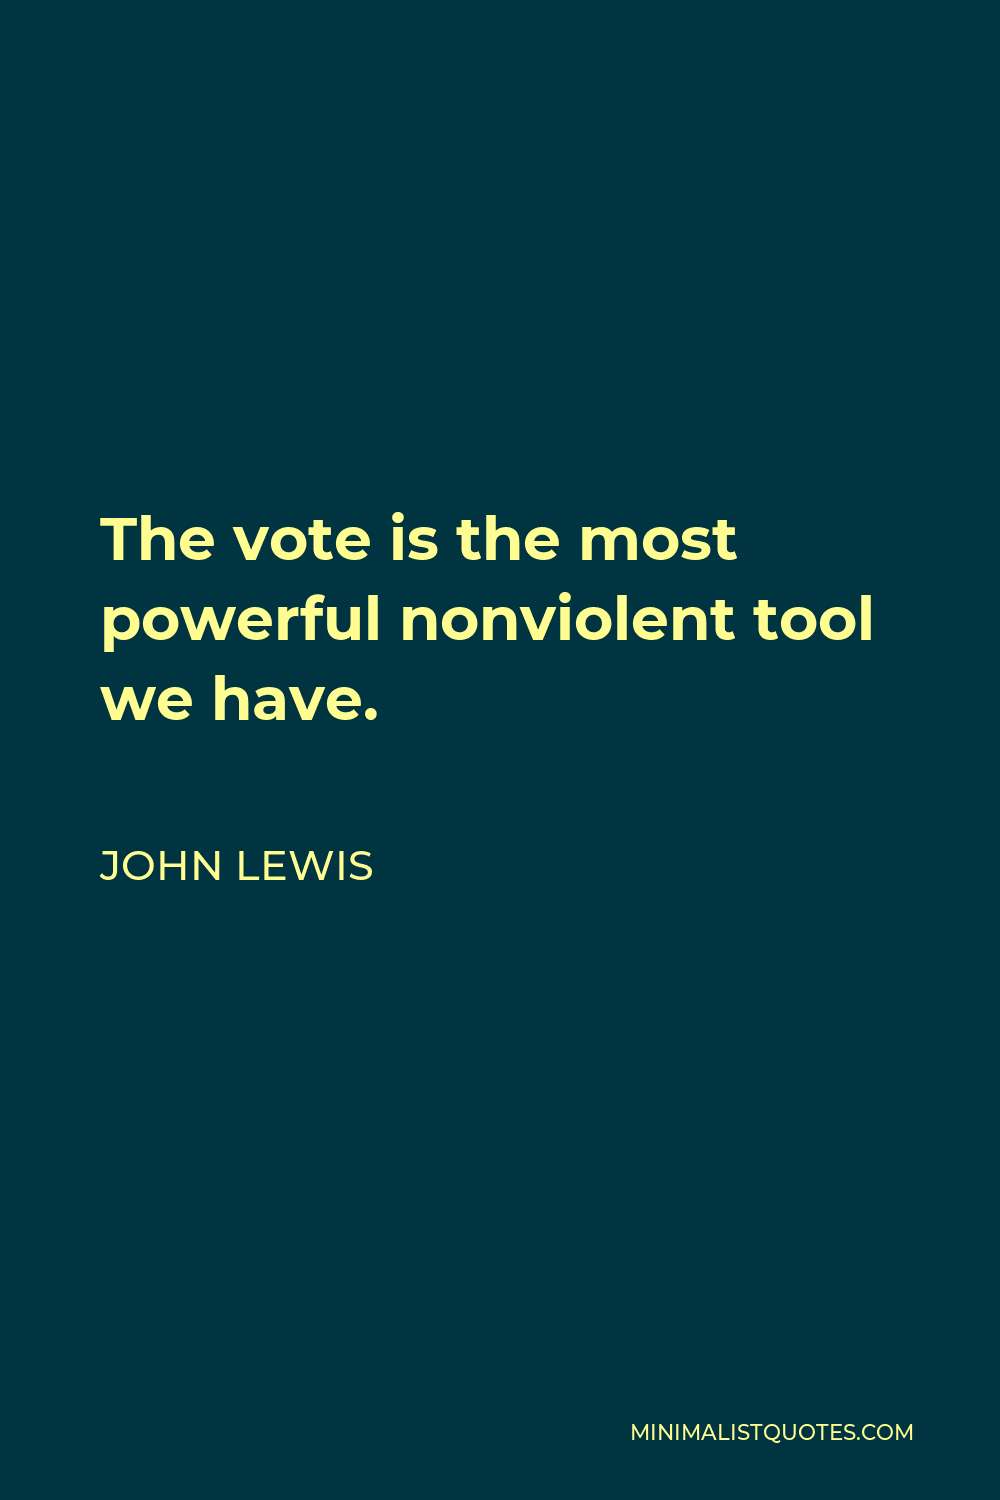 John Lewis Quote - The vote is the most powerful nonviolent tool we have.